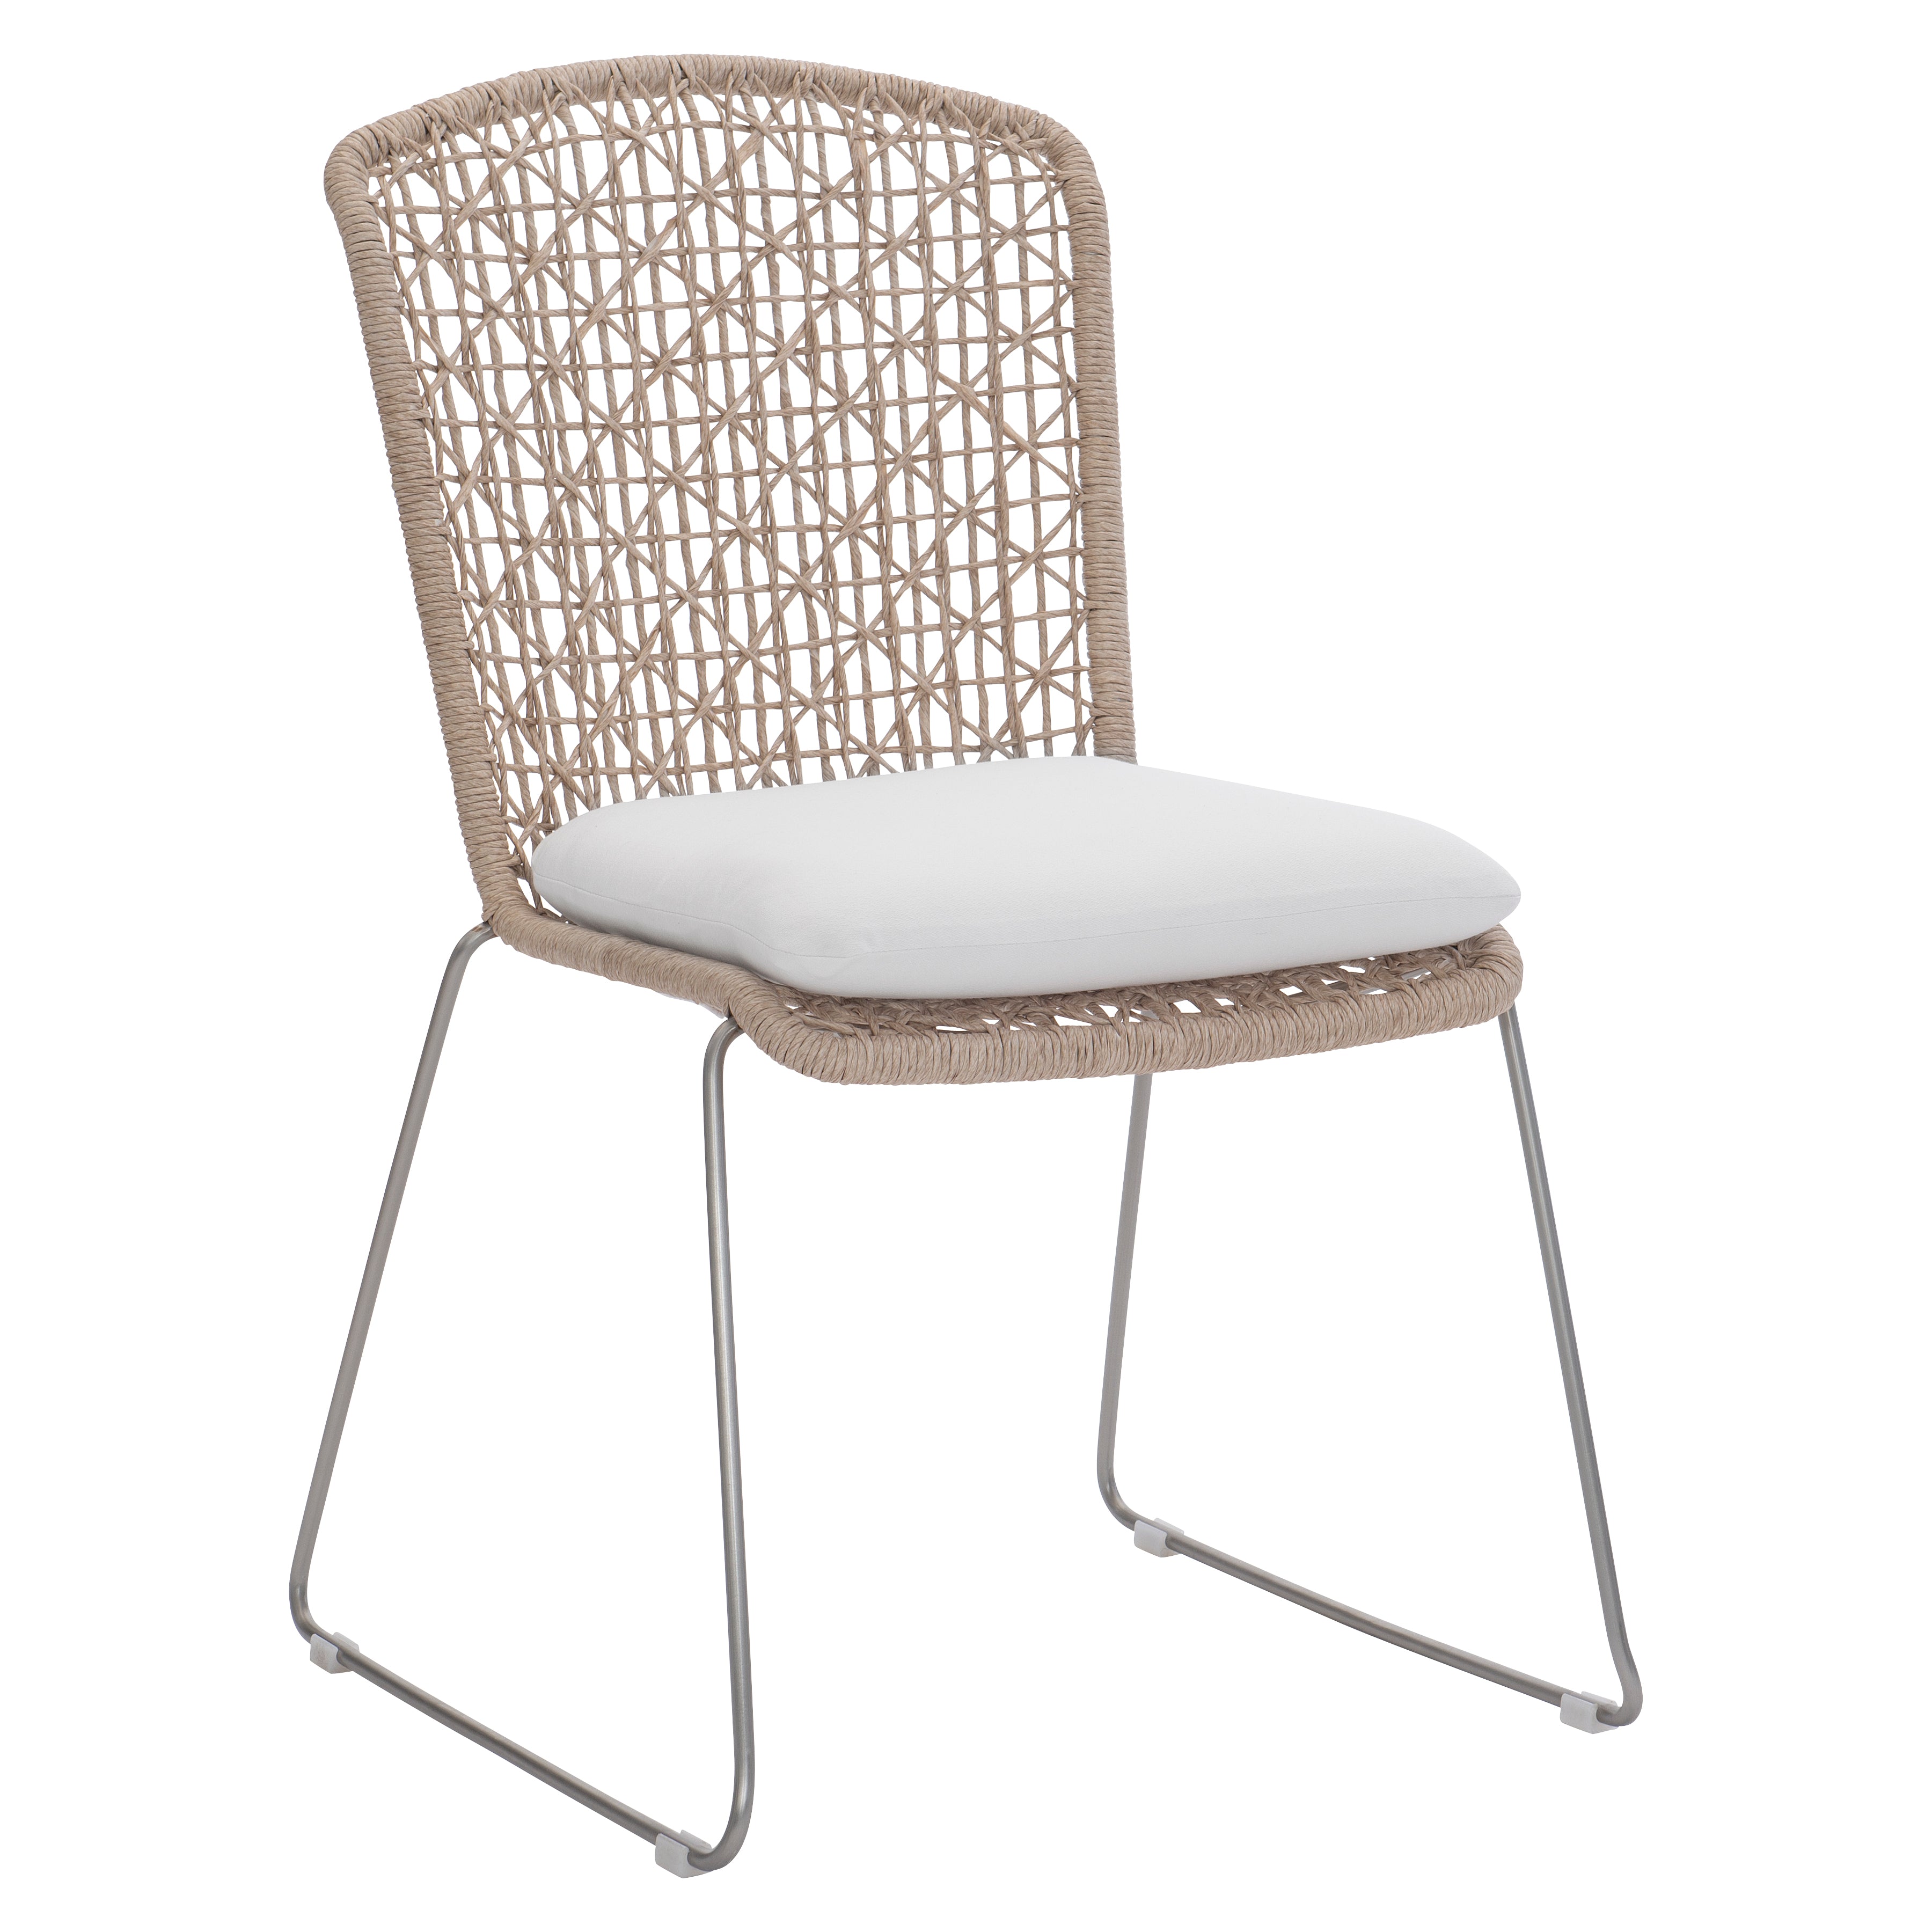 Carmel Outdoor Side Chair with Seat Pad - Quick Ship